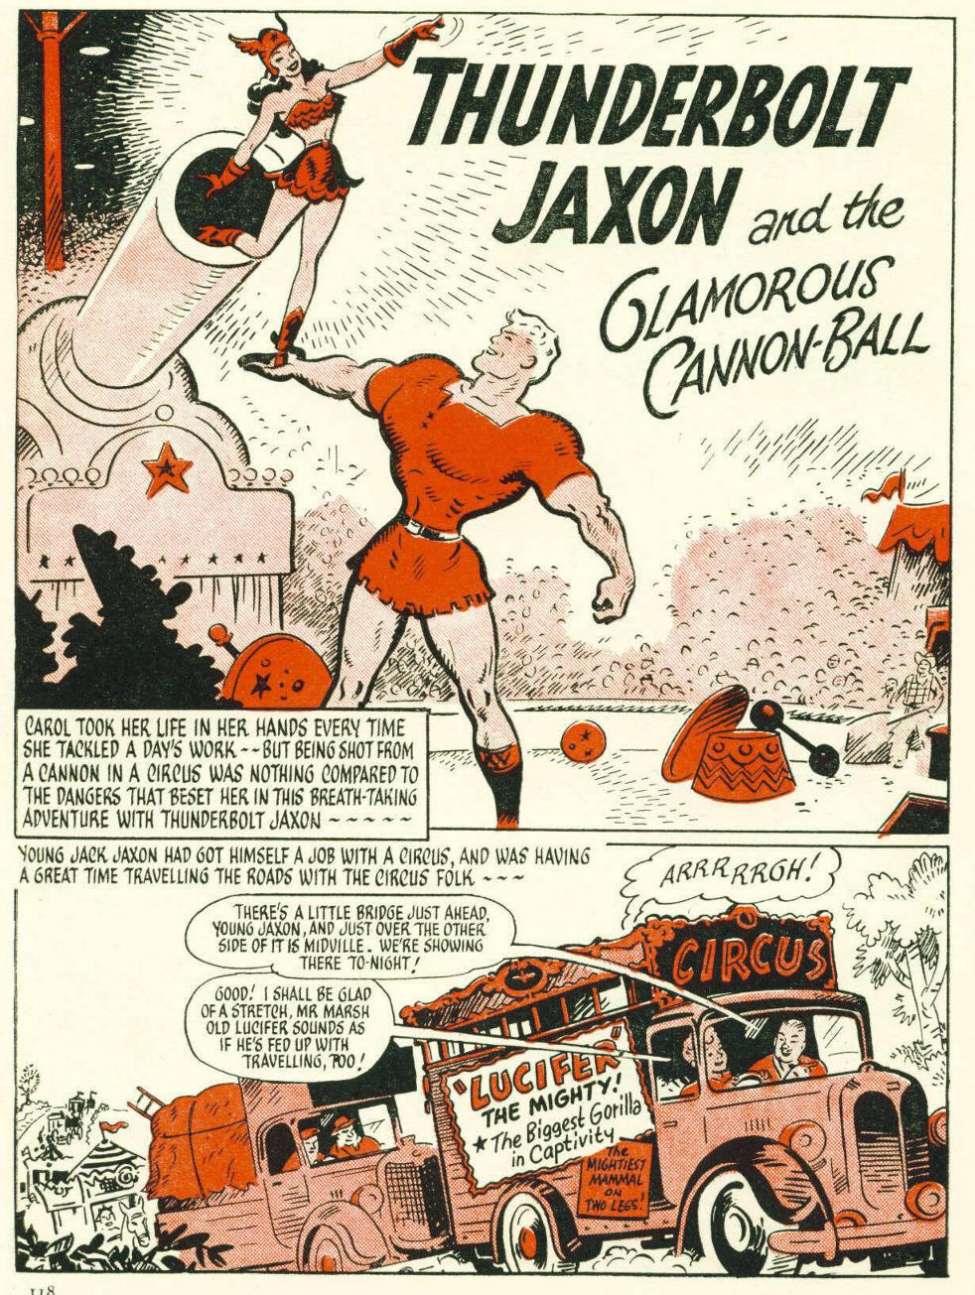 Comic Book Cover For Thunderbolt Jaxon and the Glamorous Cannon-Ball